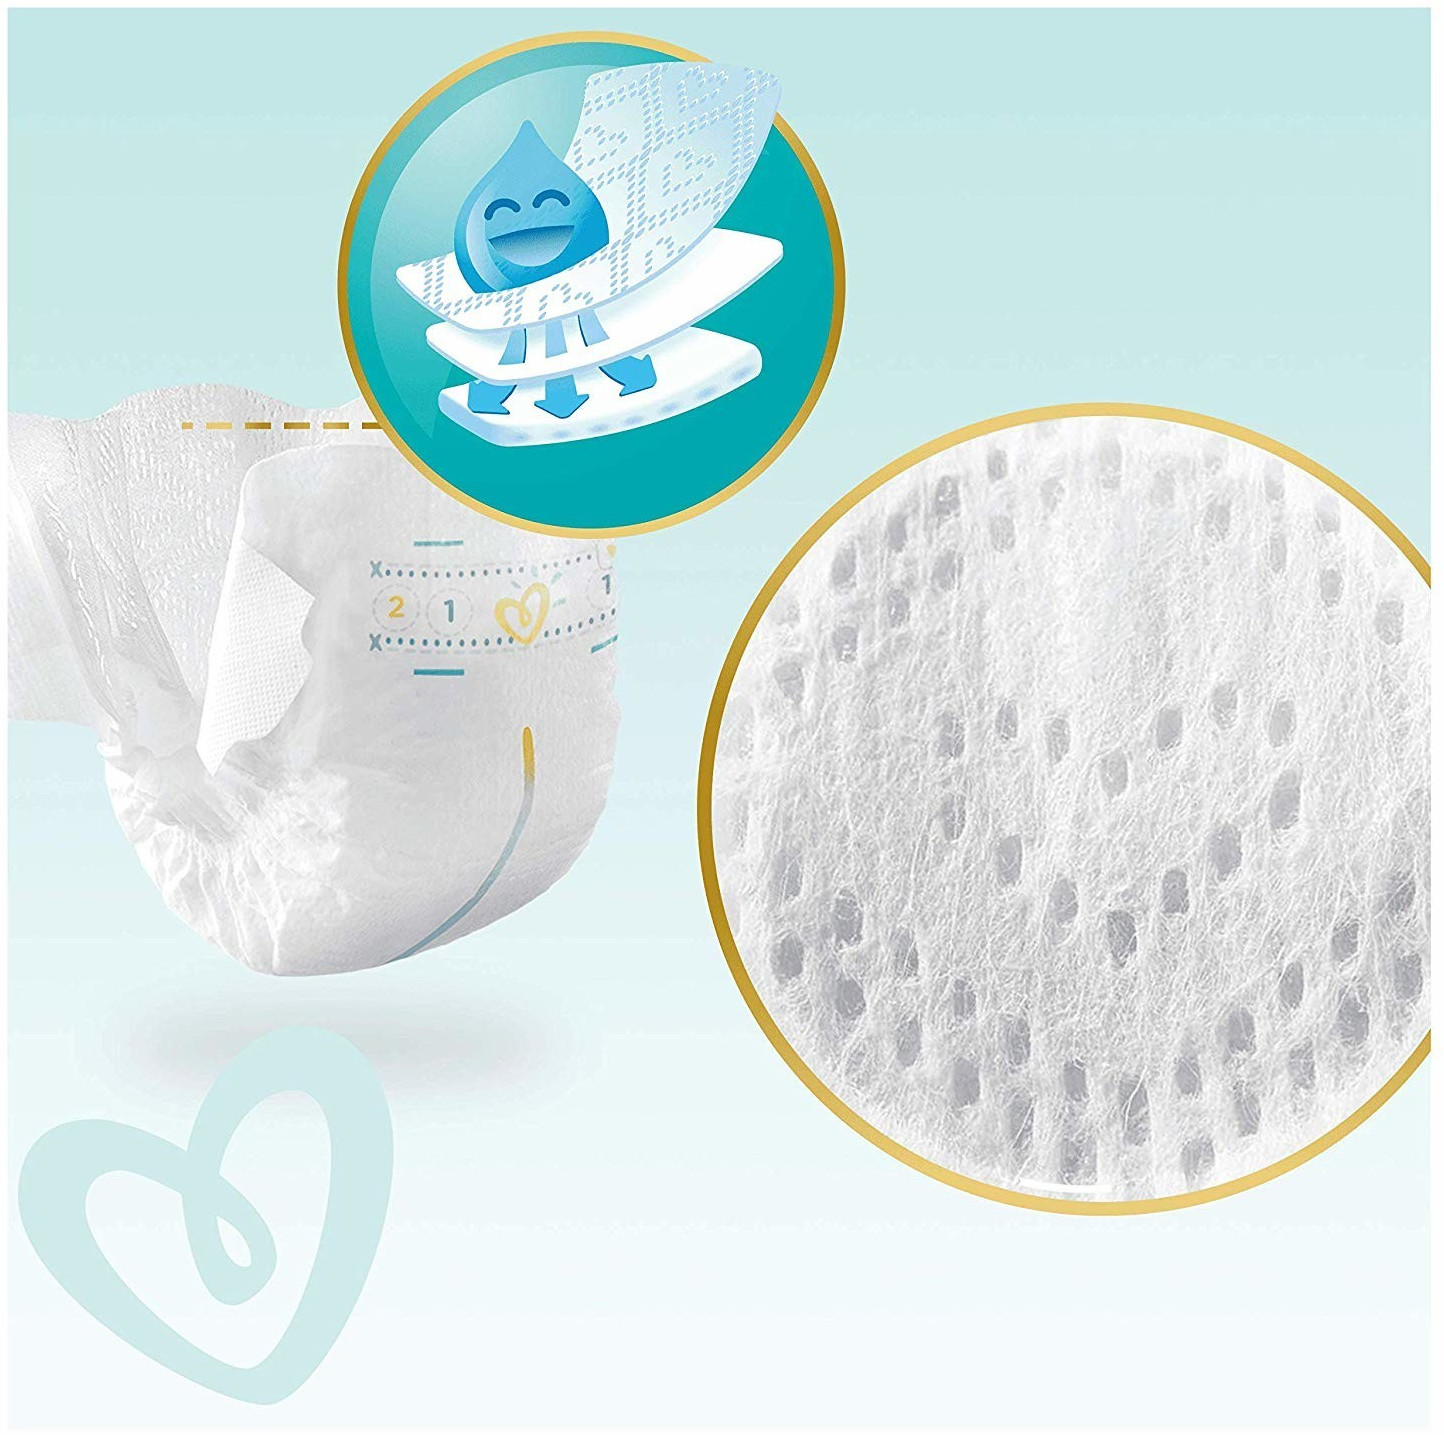 PAMPERS Premium protection couches taille 1 (2-5kg) 44 couches pas cher 